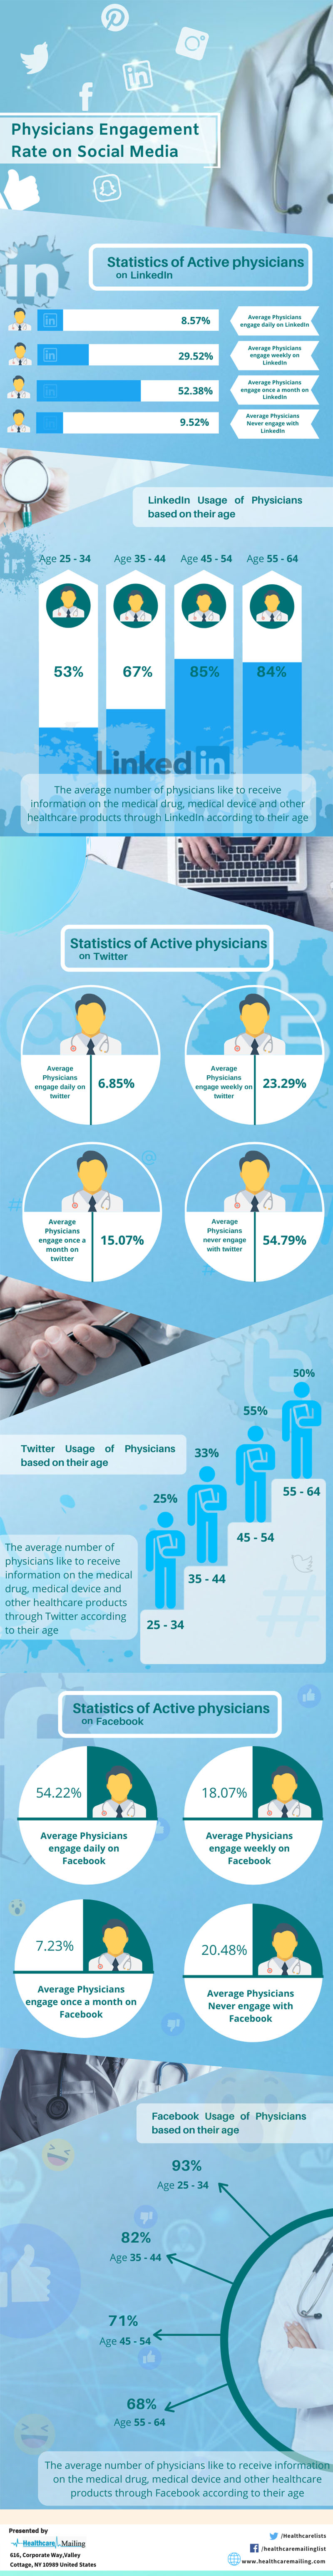 physicians-engagement-rate-on-social-media